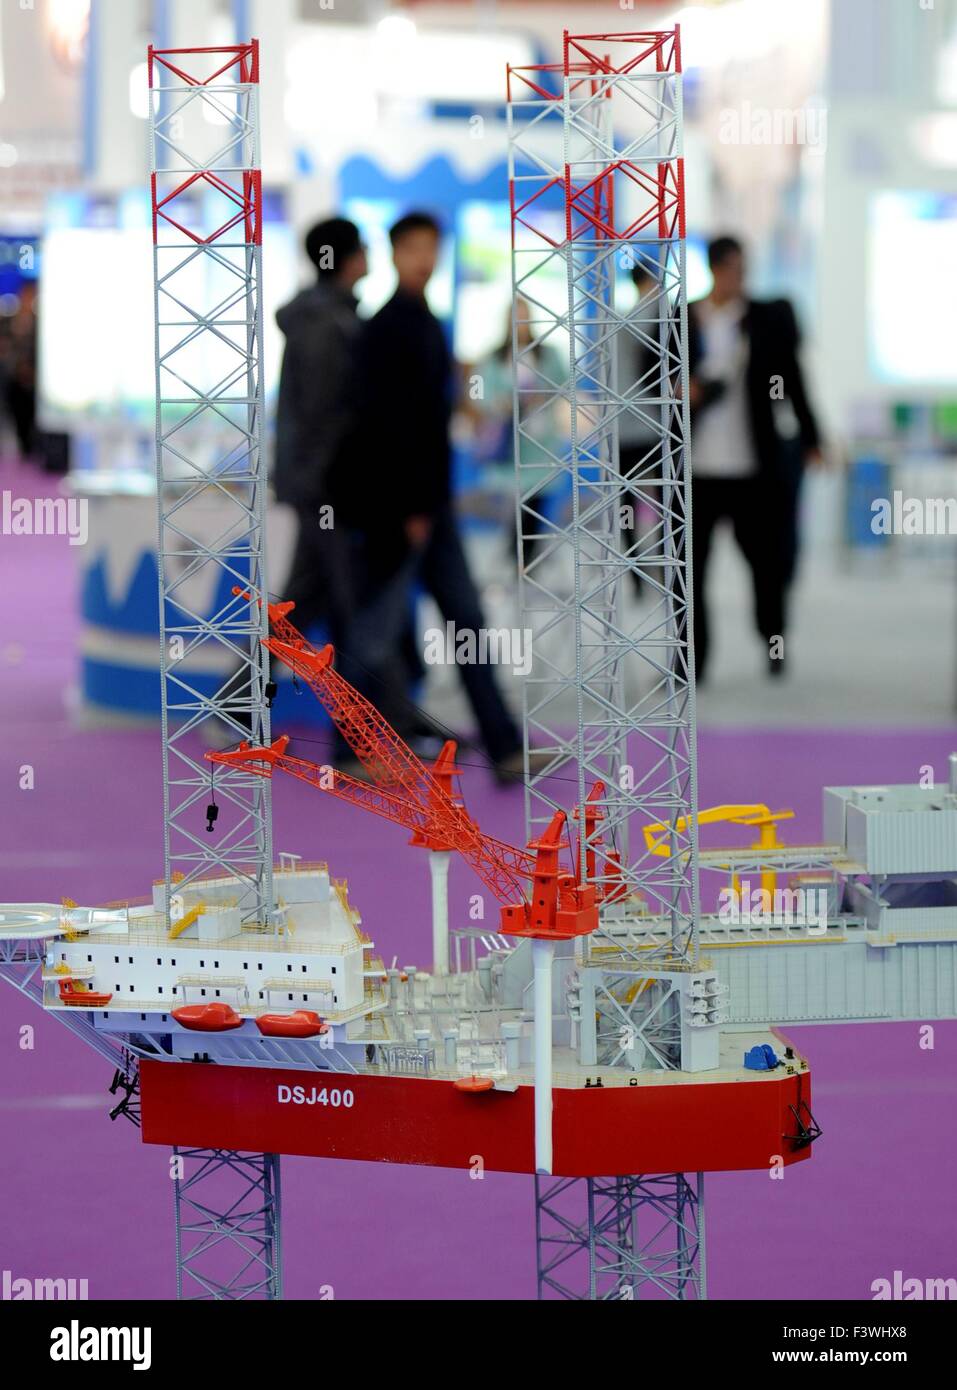 (151013) -- HARBIN, Oct. 13, 2015 (Xinhua) -- The booth of China Shipbuilding Industry Corporation is seen during the second China-Russia Exposition in Harbin, northeast China's Heilongjiang Province, Oct. 13, 2015. Nearly 10,000 businessmen from 103 countries and regions attended the expo. The event will last till Oct. 16, 2015.(Xinhua/Wang Song)  (zhs) Stock Photo